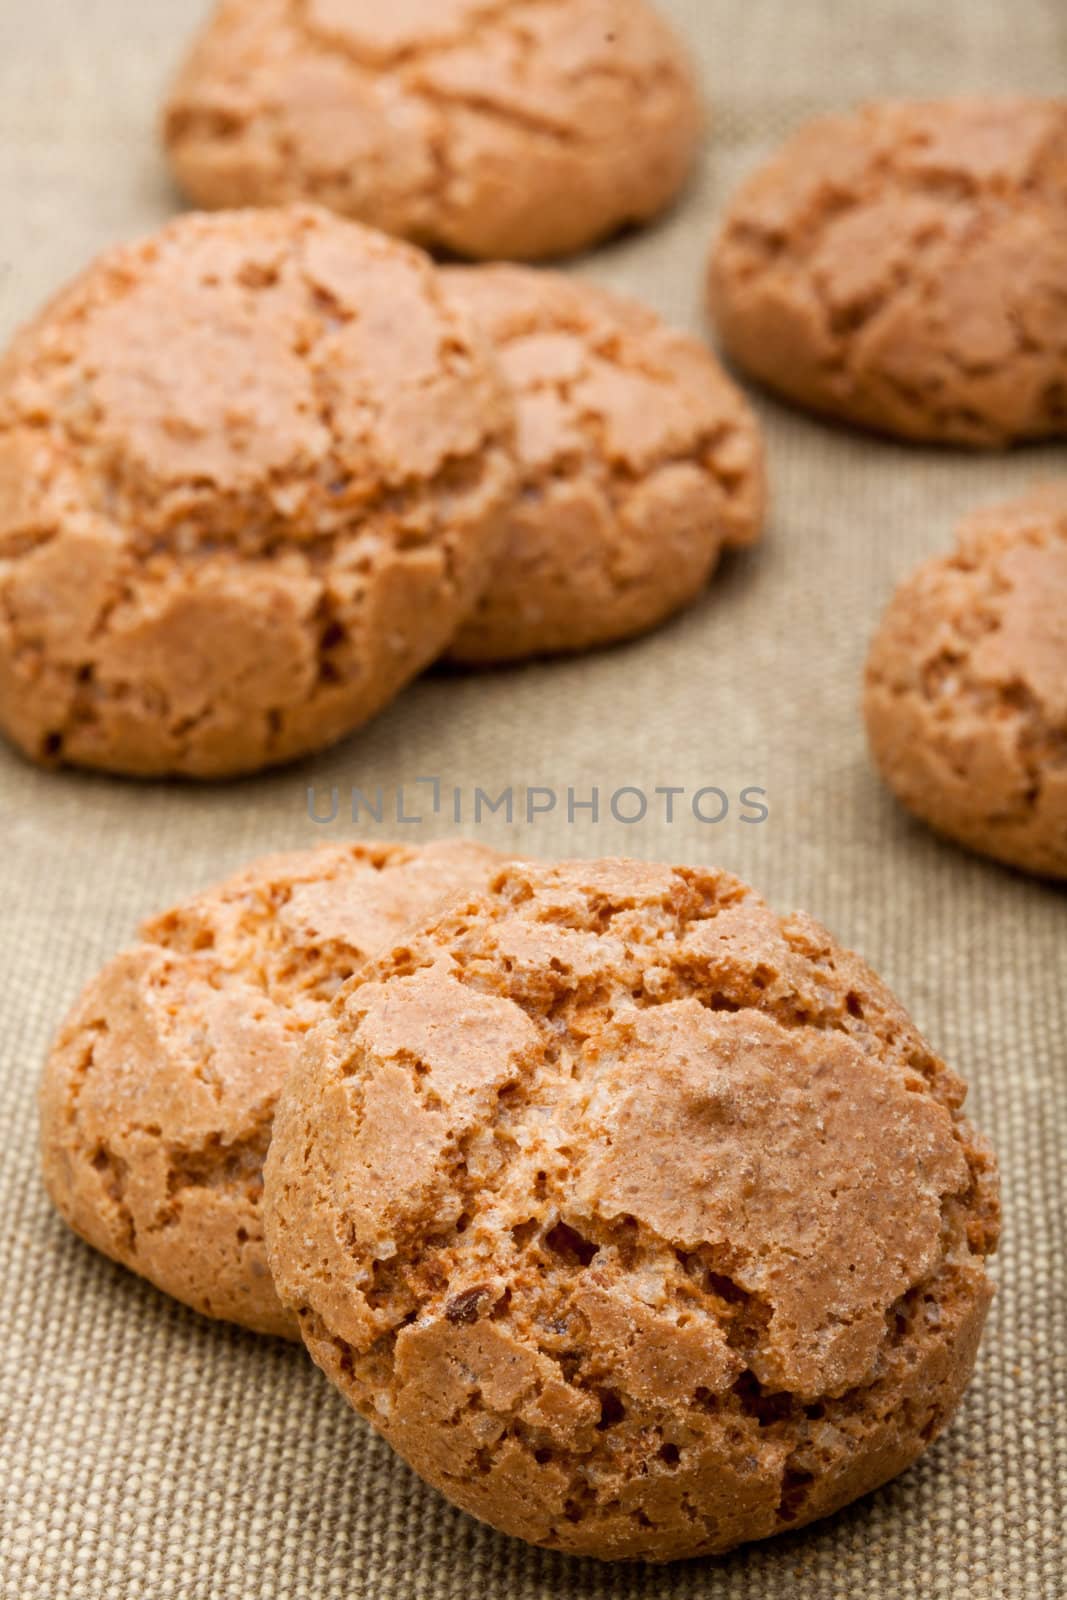 amaretti biscuits by maxg71